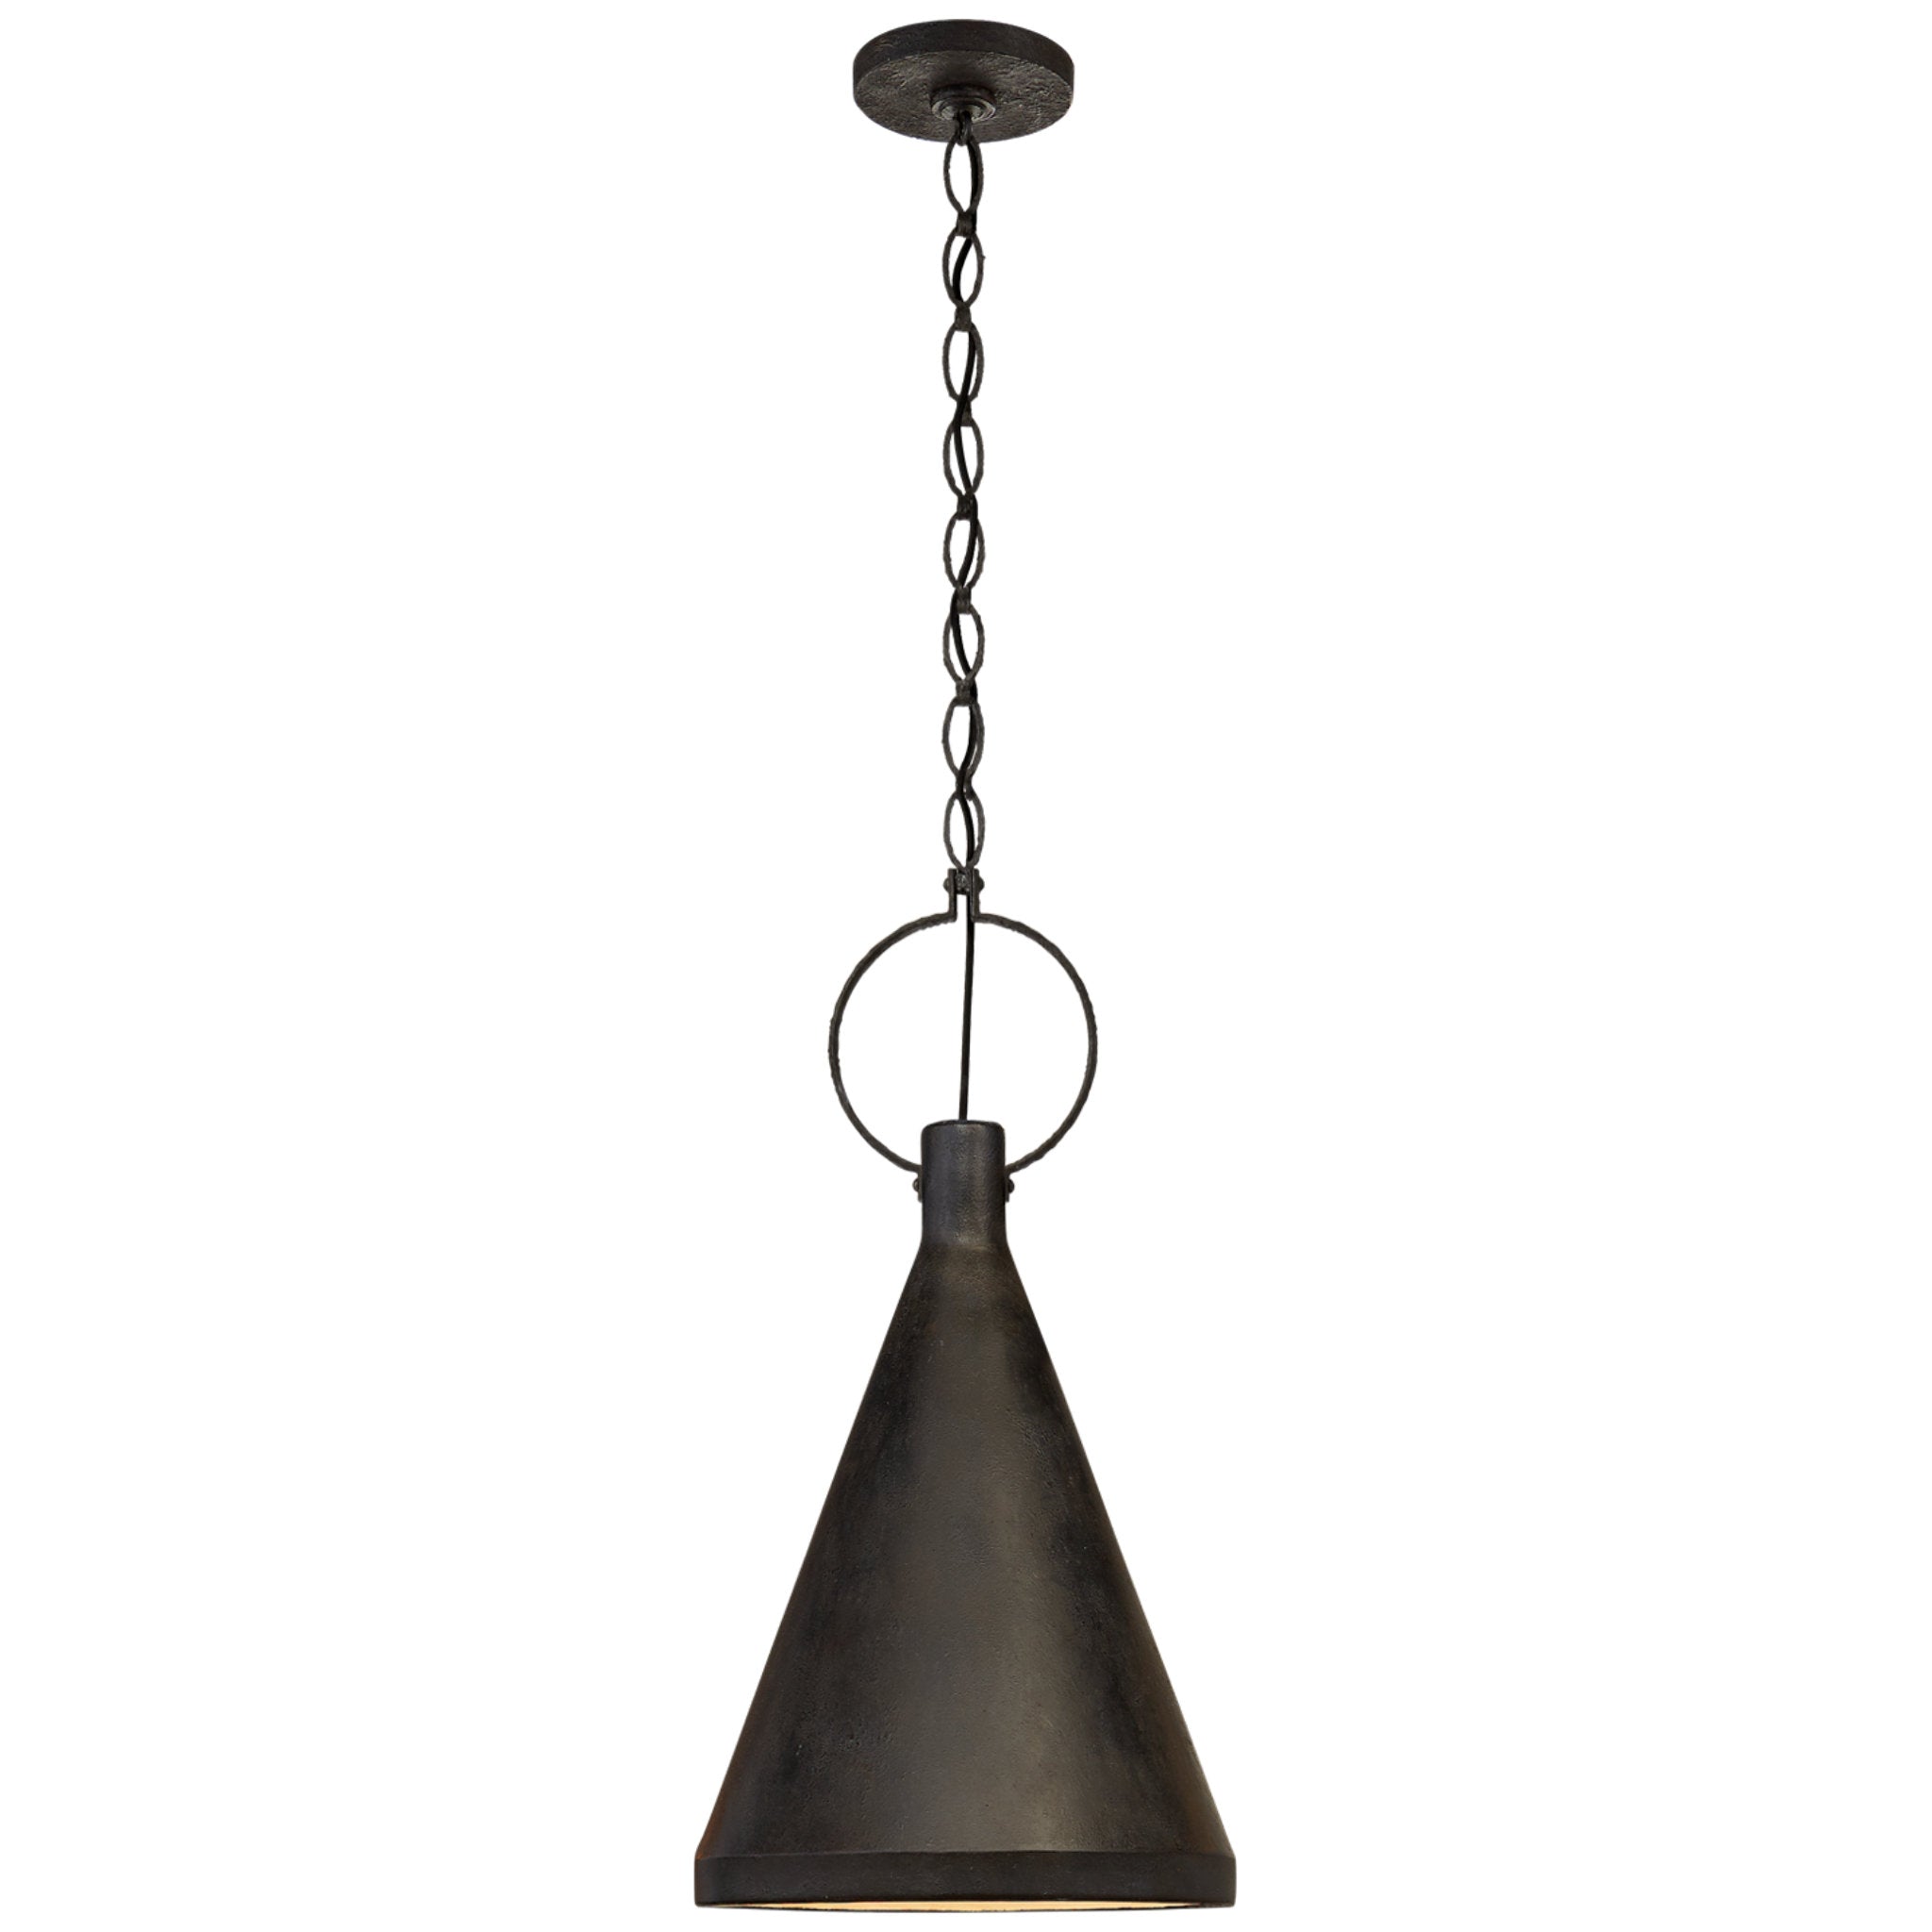 Suzanne Kasler Limoges Medium Tall Pendant in Natural Rust with Aged Iron Shade